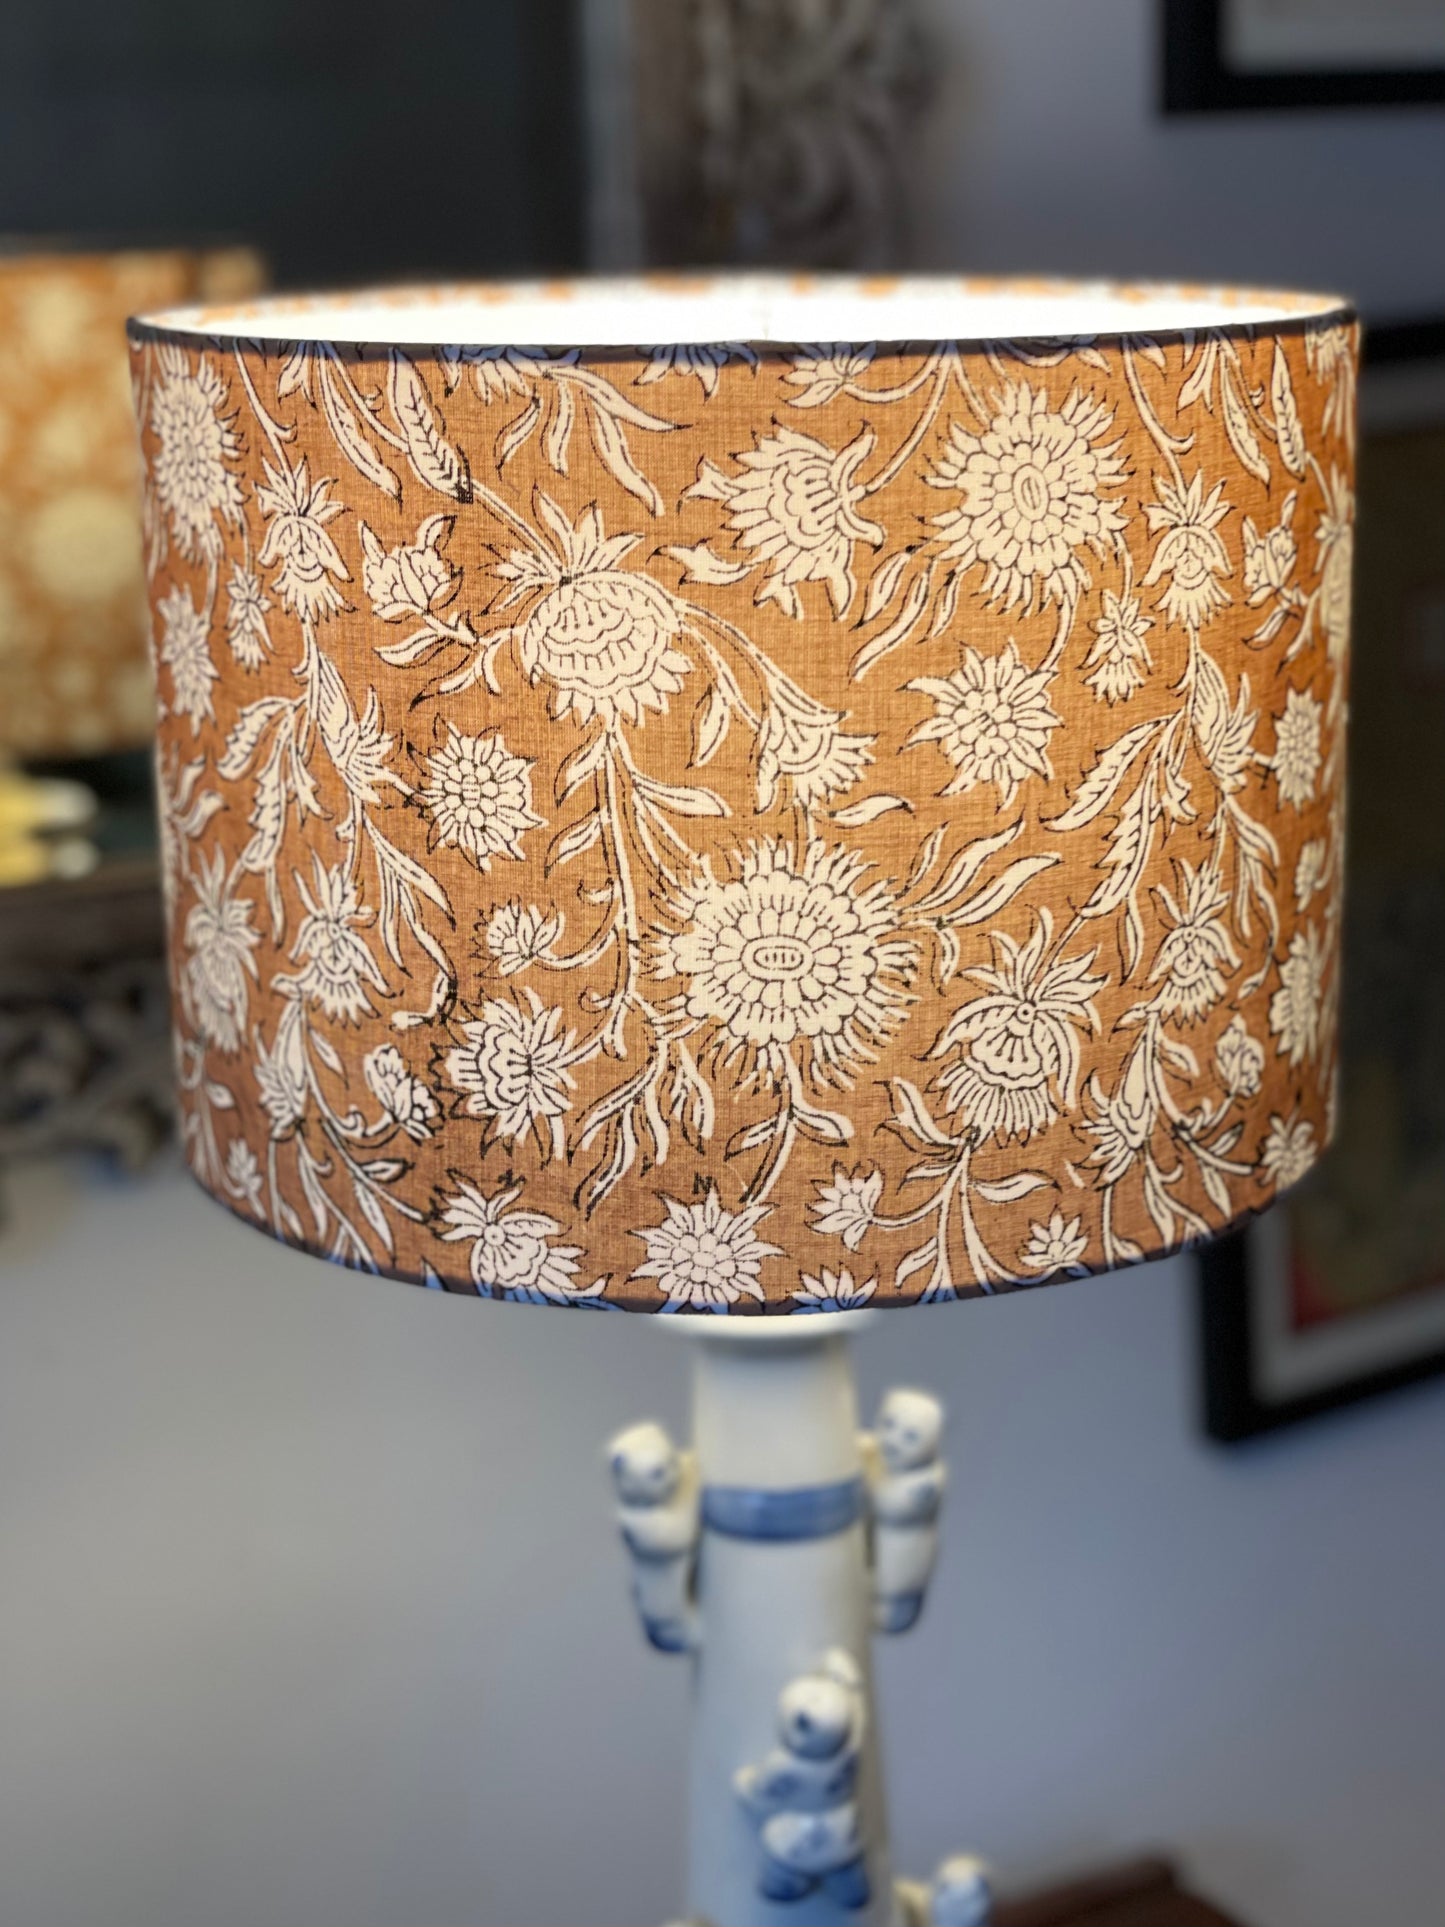 10 inch Drum Lampshade. Hand Block Print from Jaipur. Camel and Ivory Floral Motif.